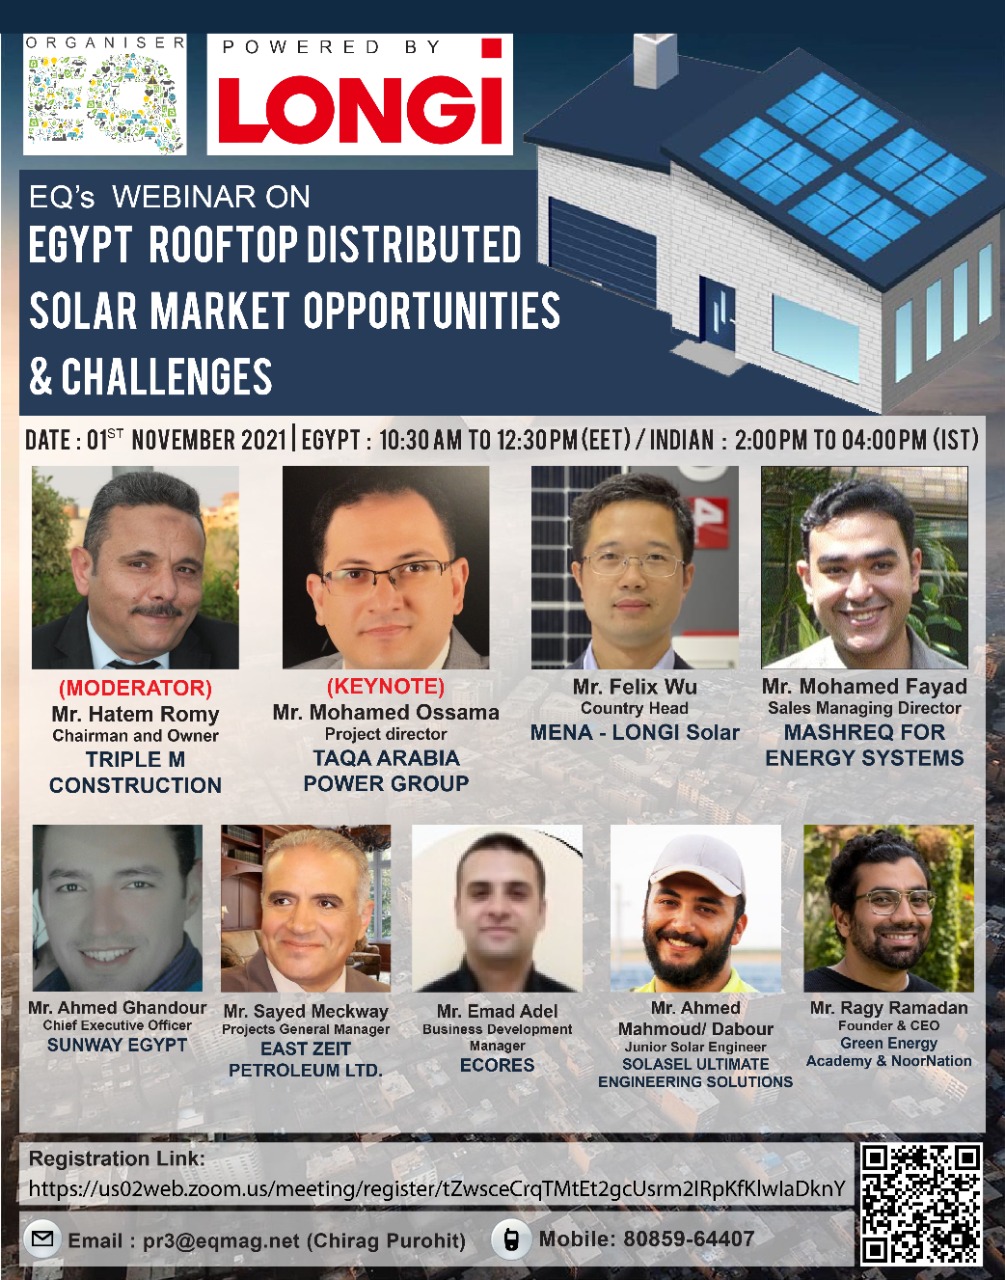 EQ Webinar on Egypt RoofTop / Distributed Solar Market Outlook Powered by LONGi On Monday November 1st From 11:00 AM Onwards…. Register Now !!!